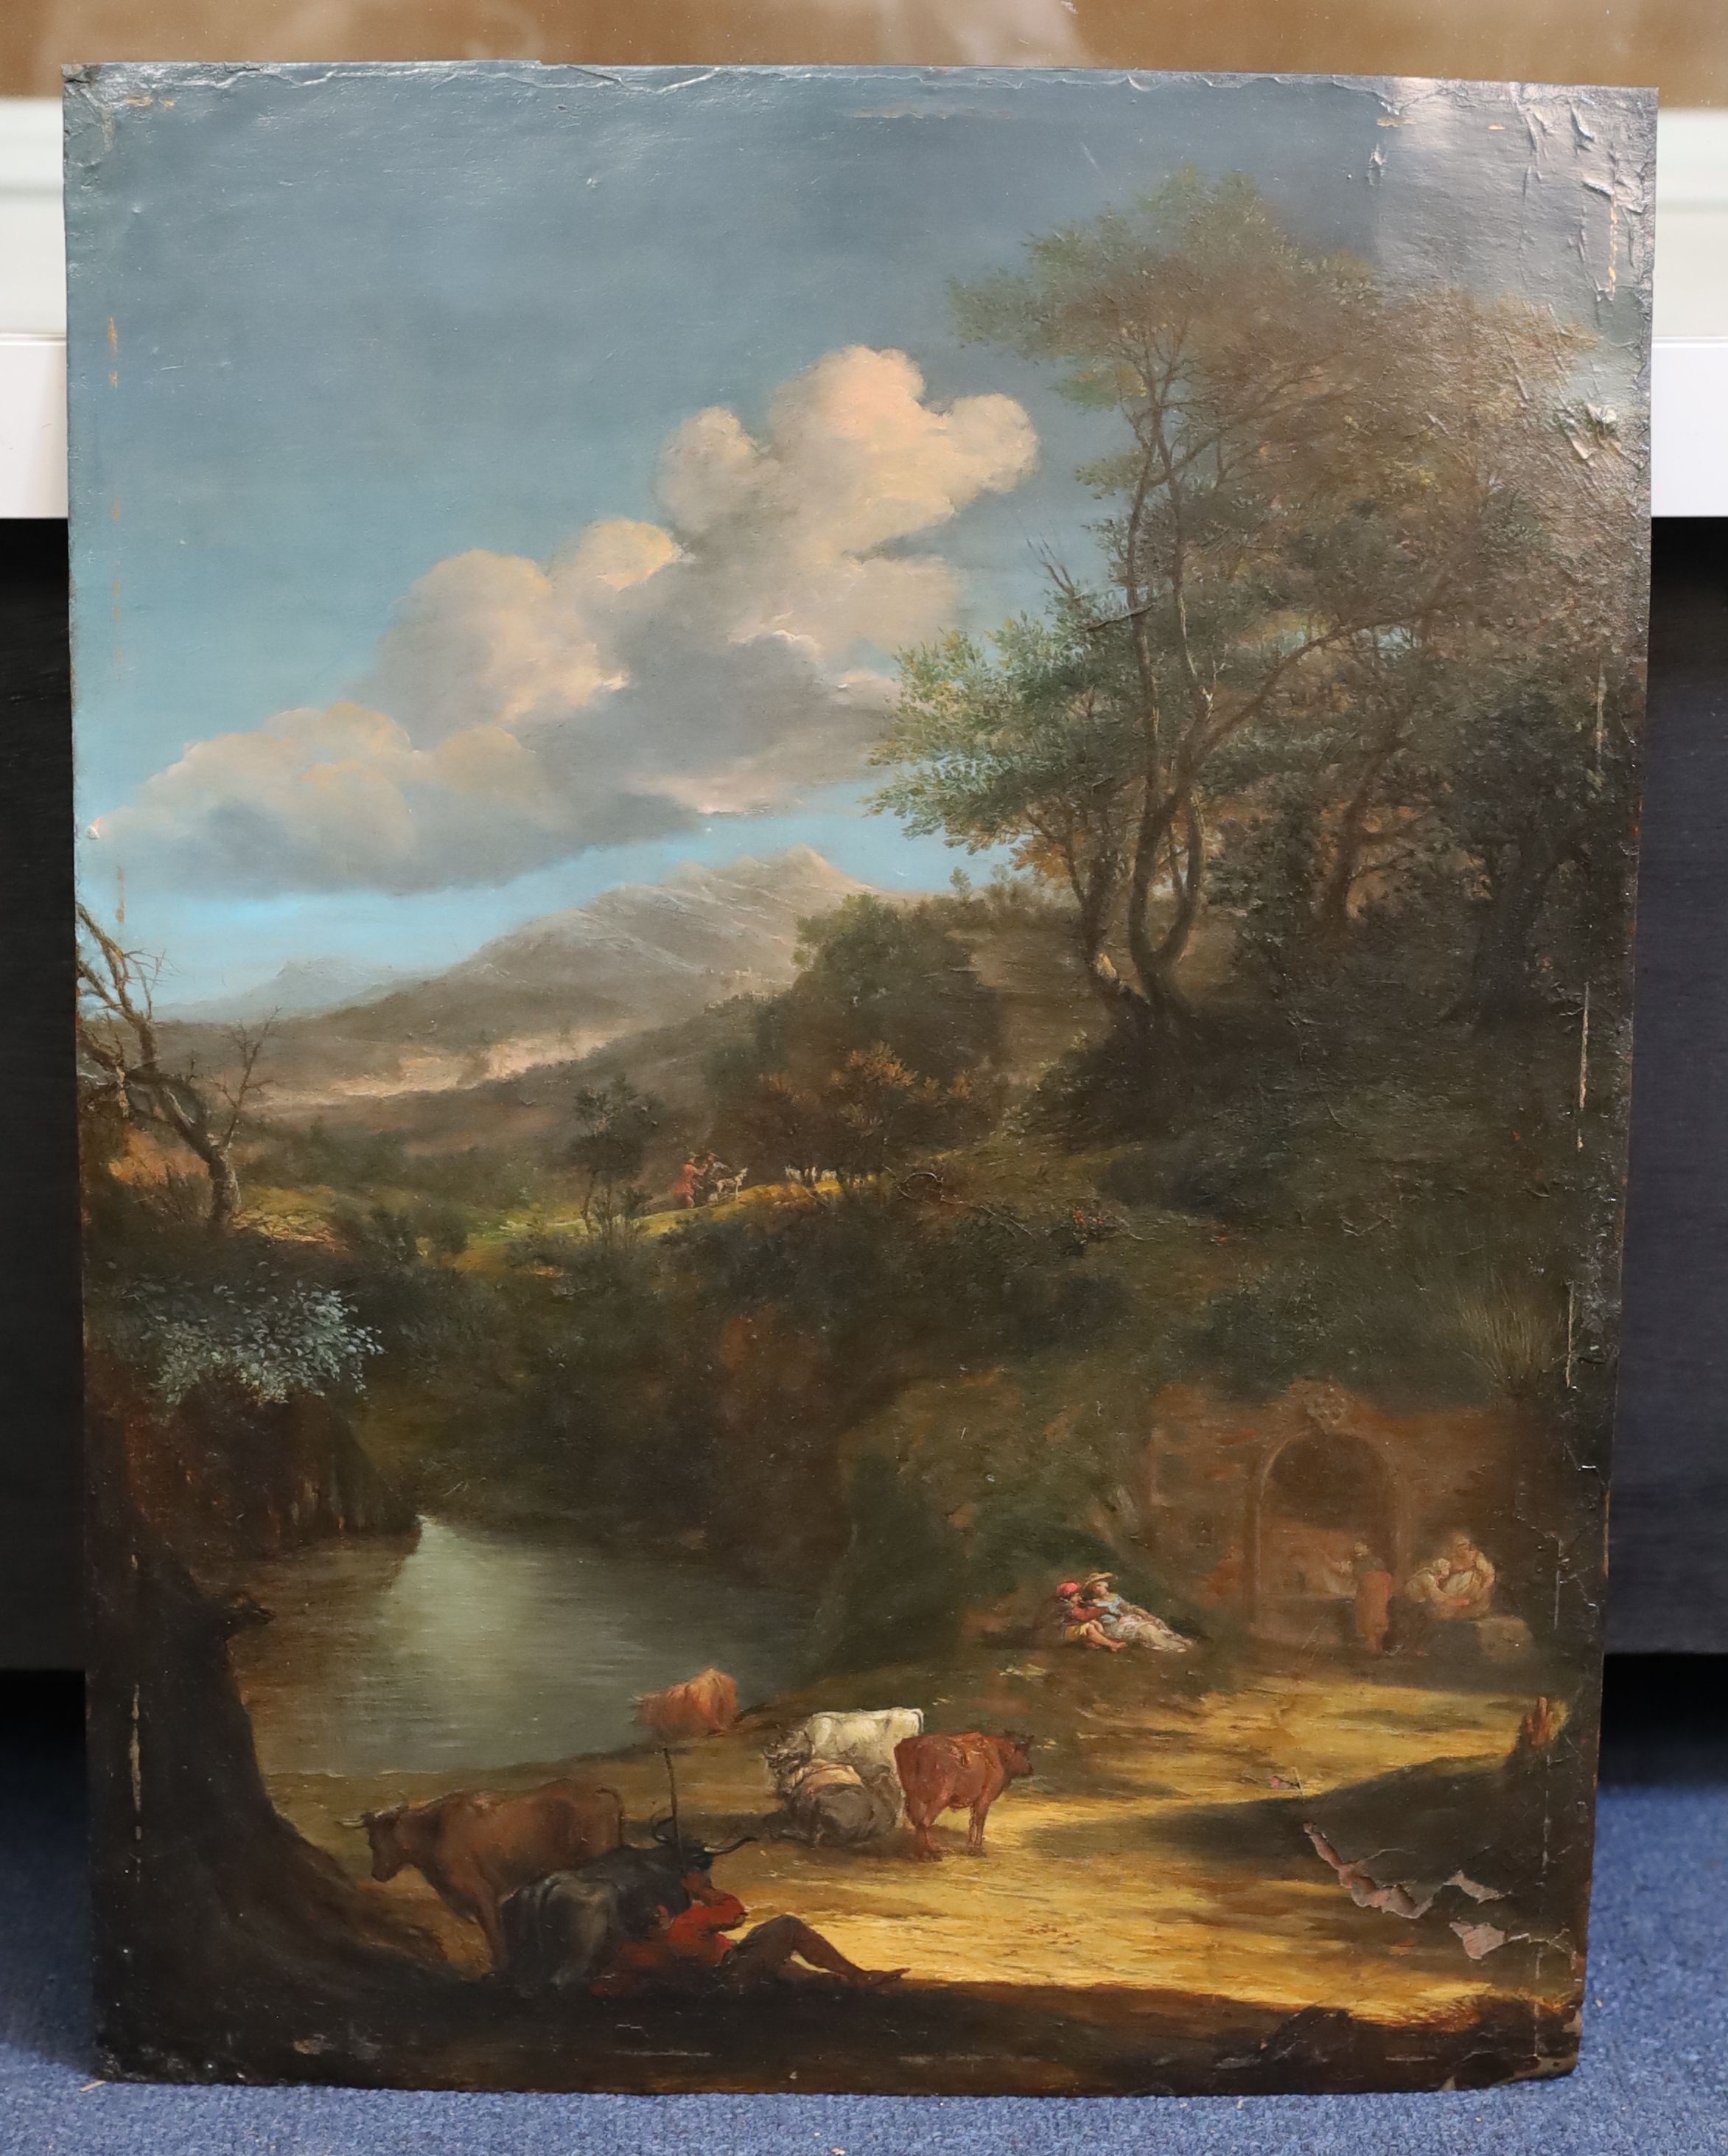 18th century Flemish School, Cattle drover and other figures at rest in an Italianate landscape, oil on copper, 47.5 x 36cm, unframed